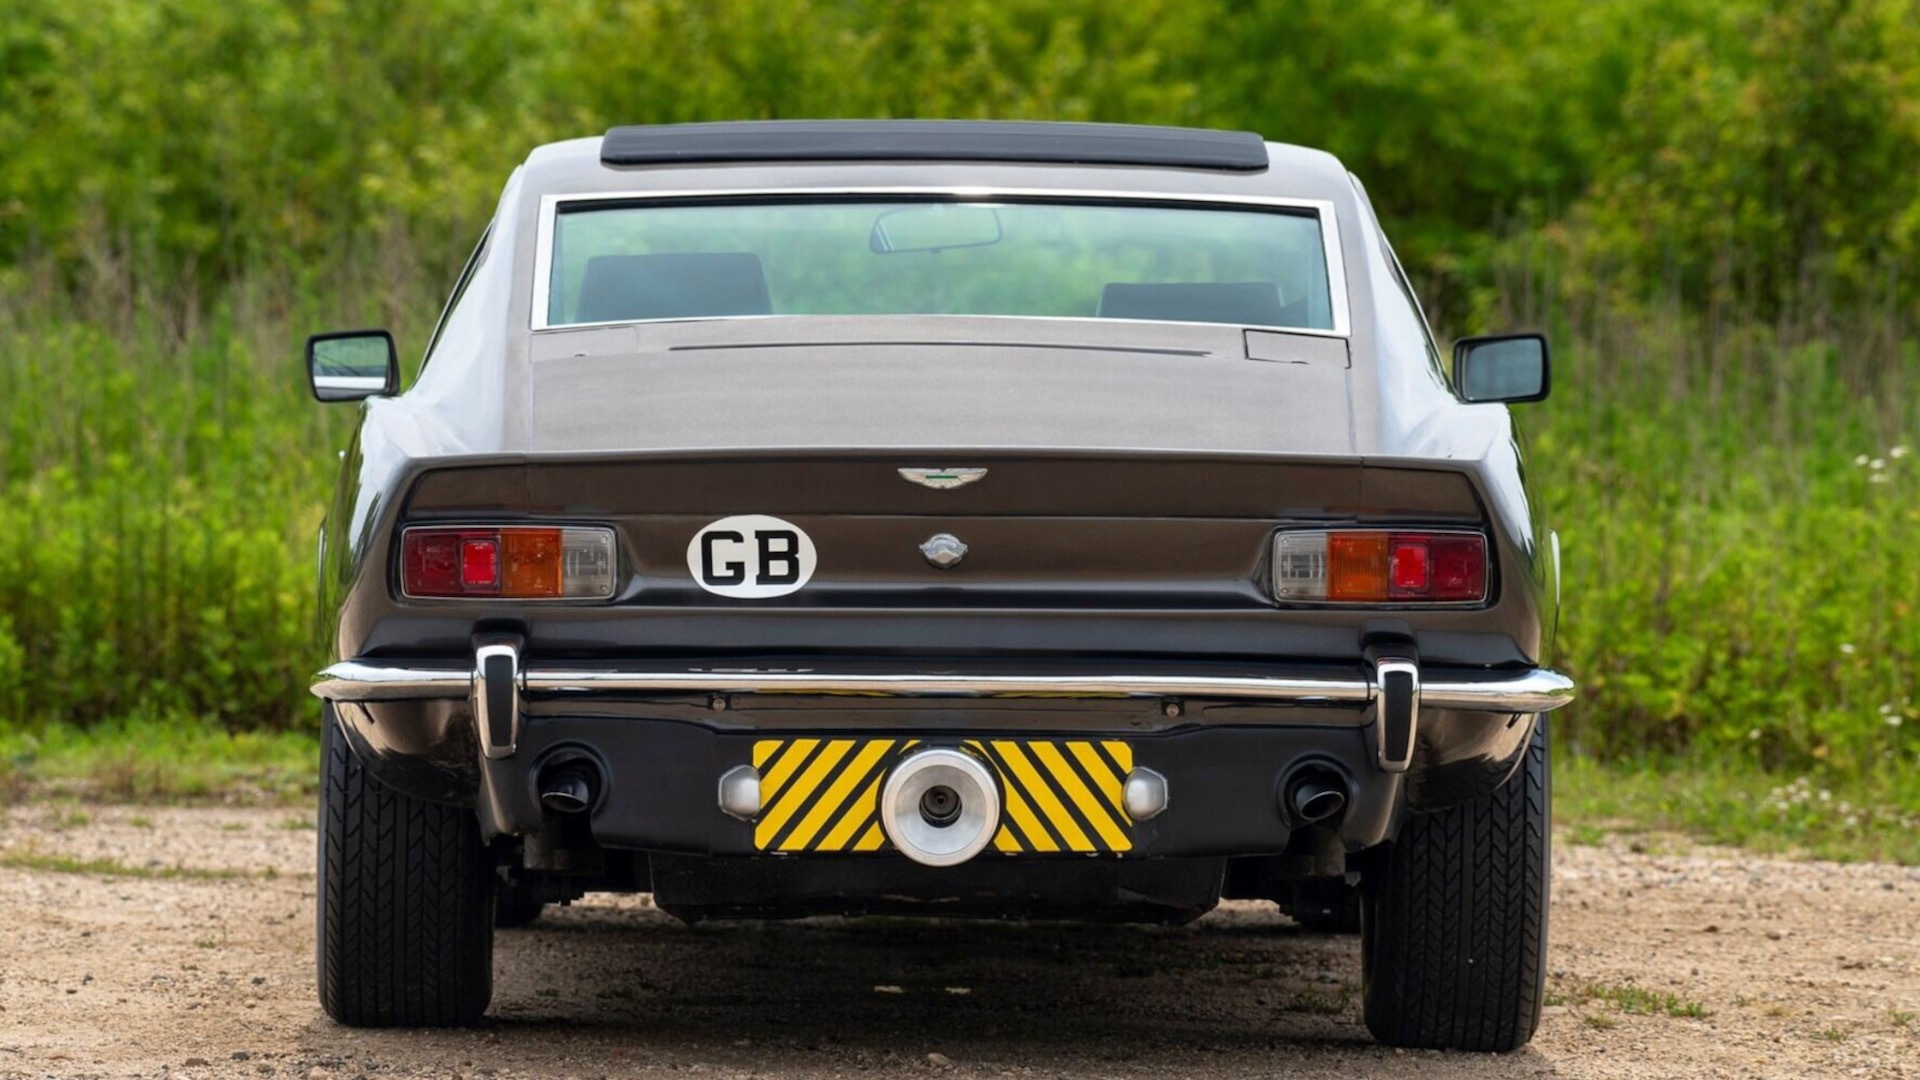 1973 Aston Martin V8 from "The Living Daylights" (photo via RM Sotheby's)